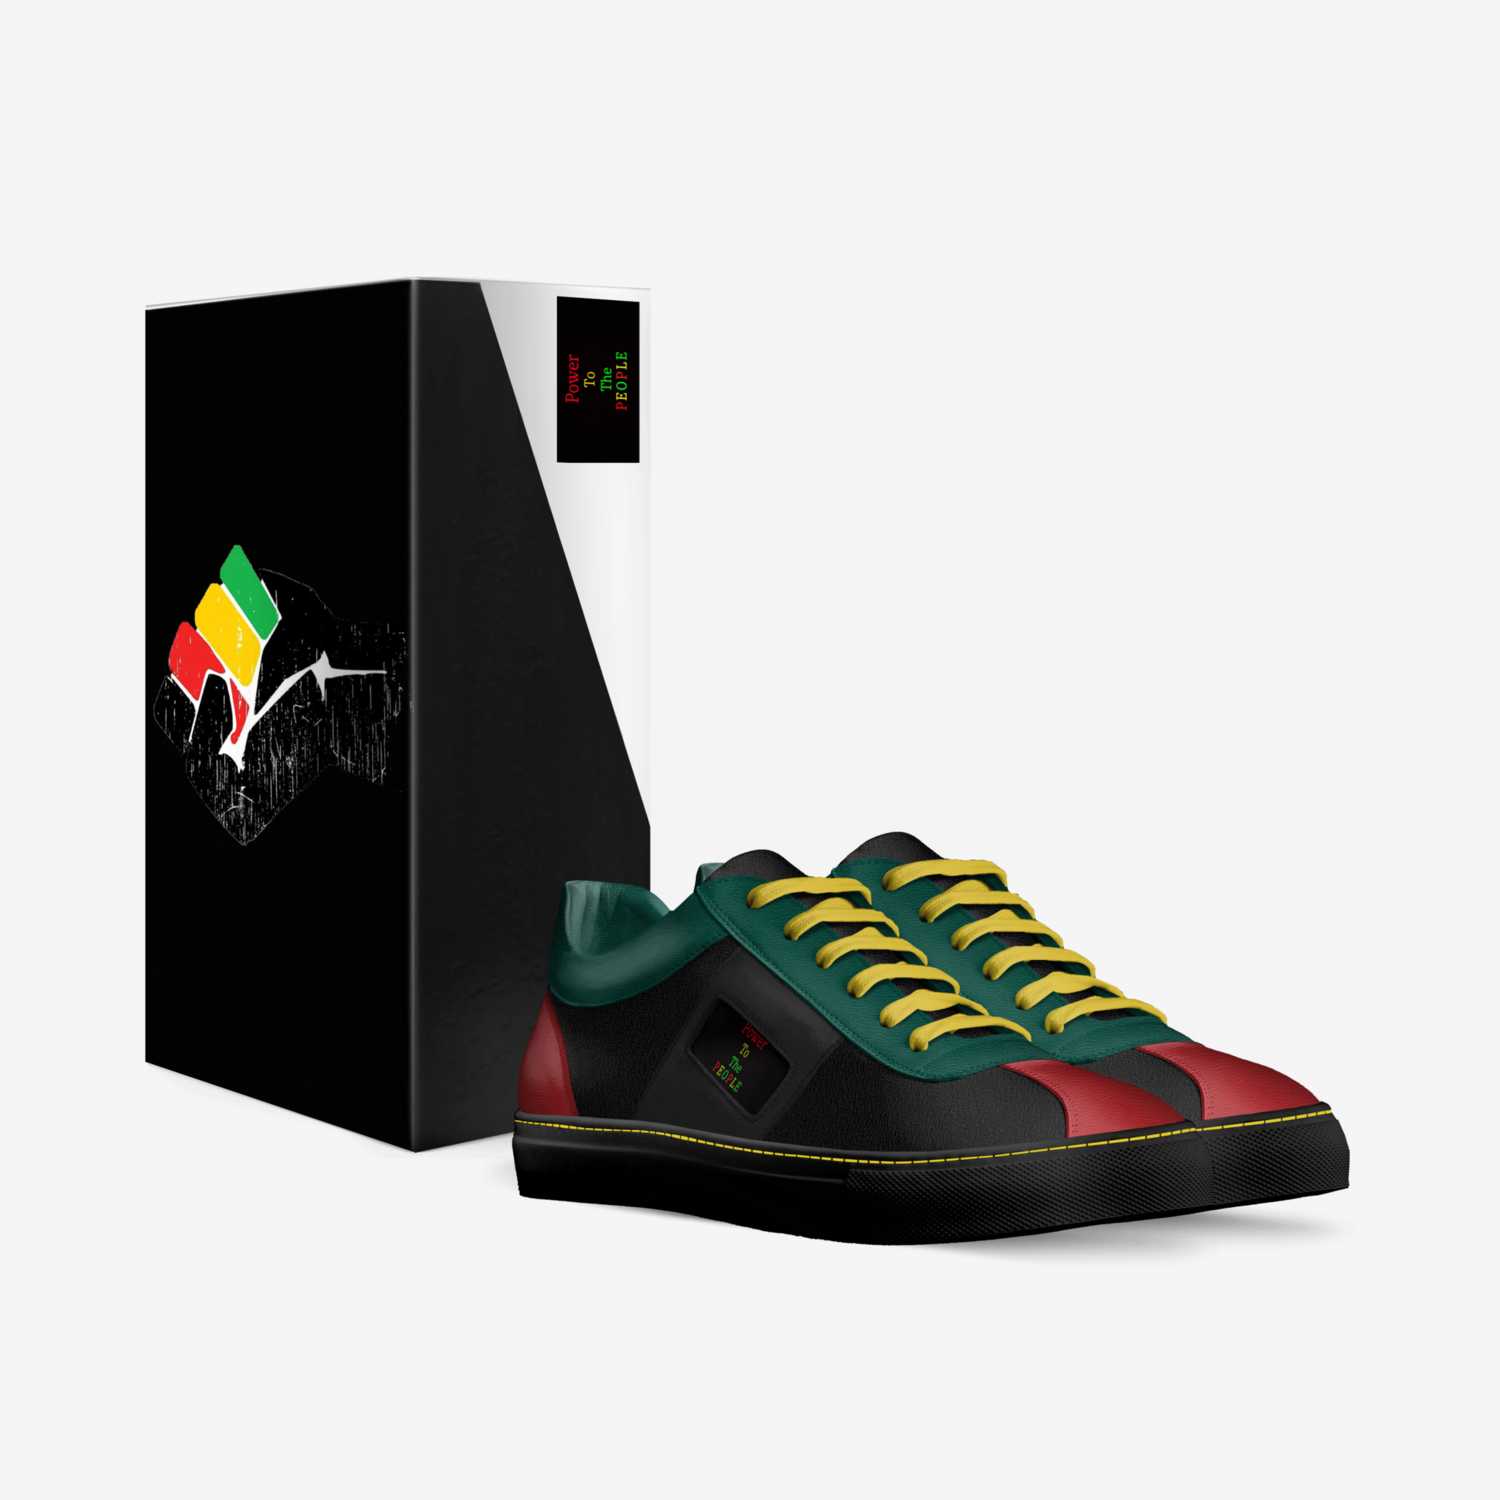 C. D'oro 2 'BHM' custom made in Italy shoes by Barry Williams | Box view